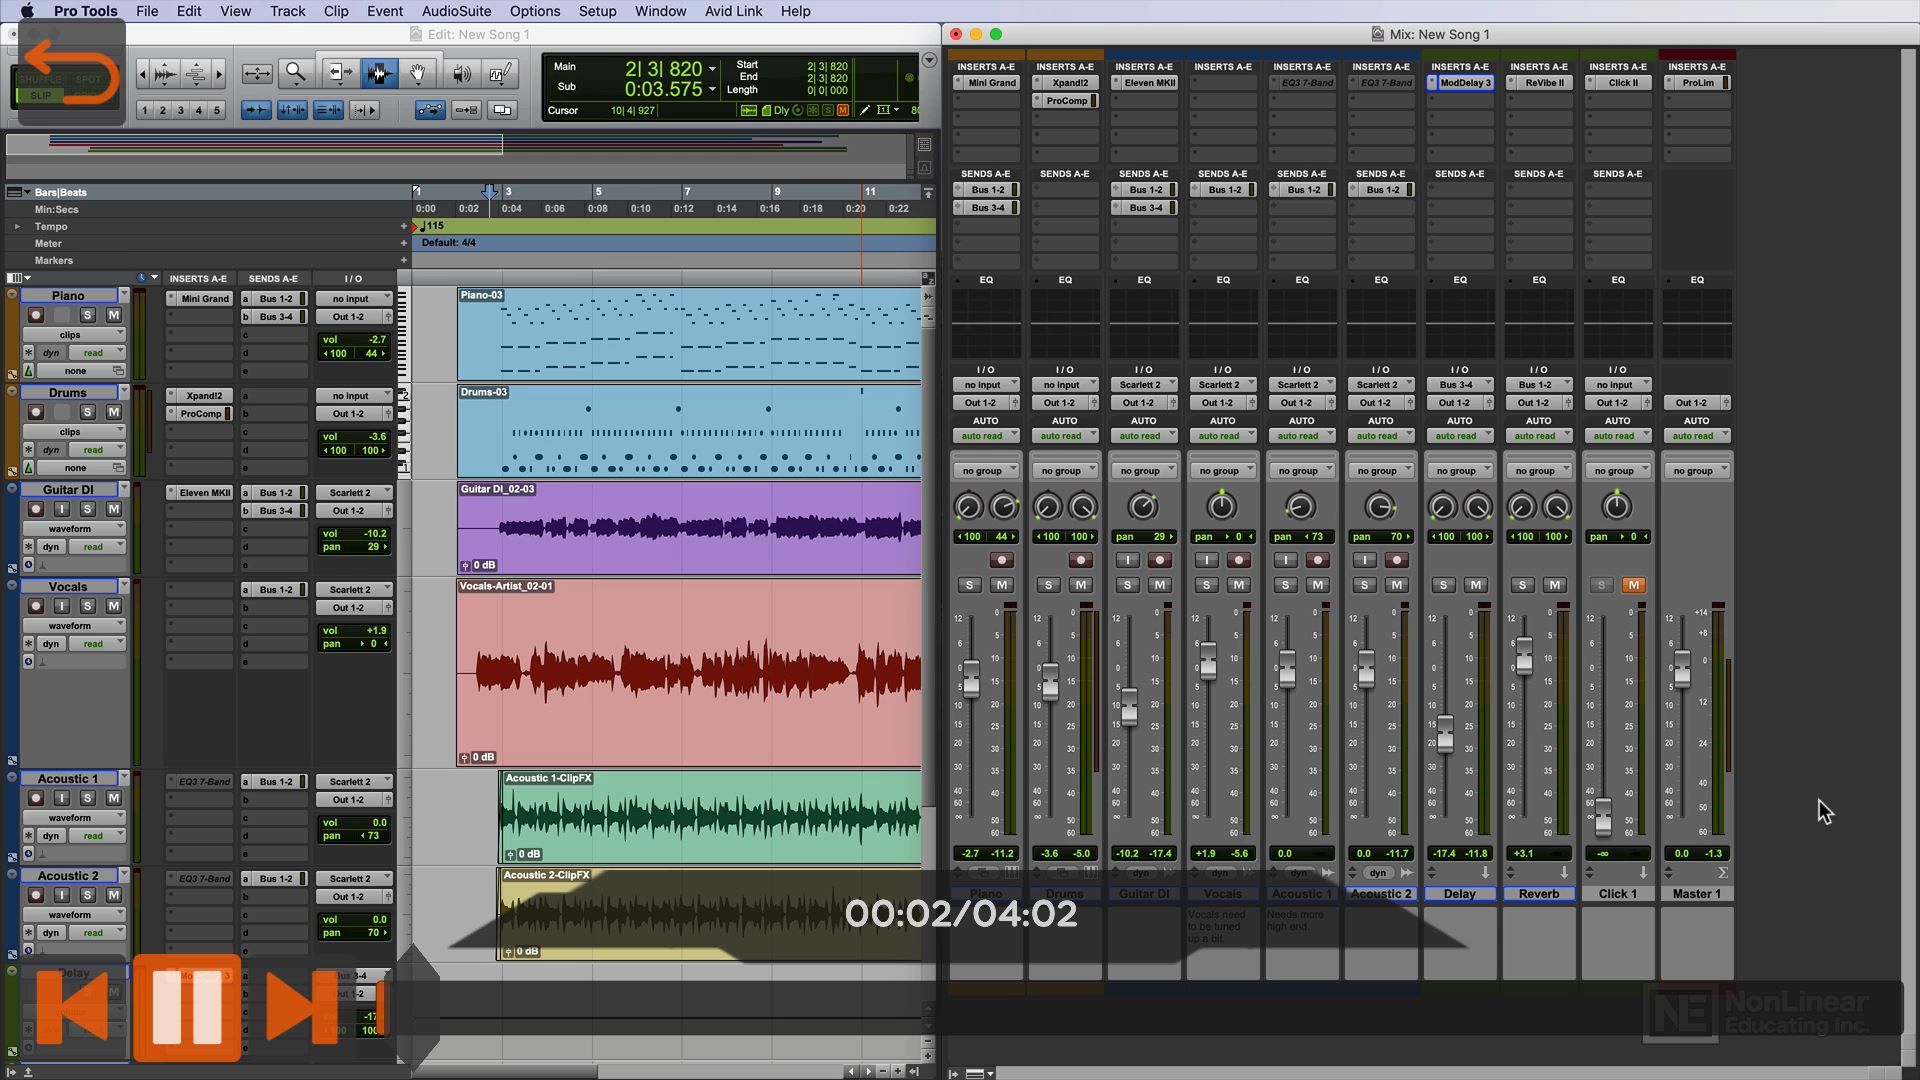 Beginners Guide to Pro Tools 2021